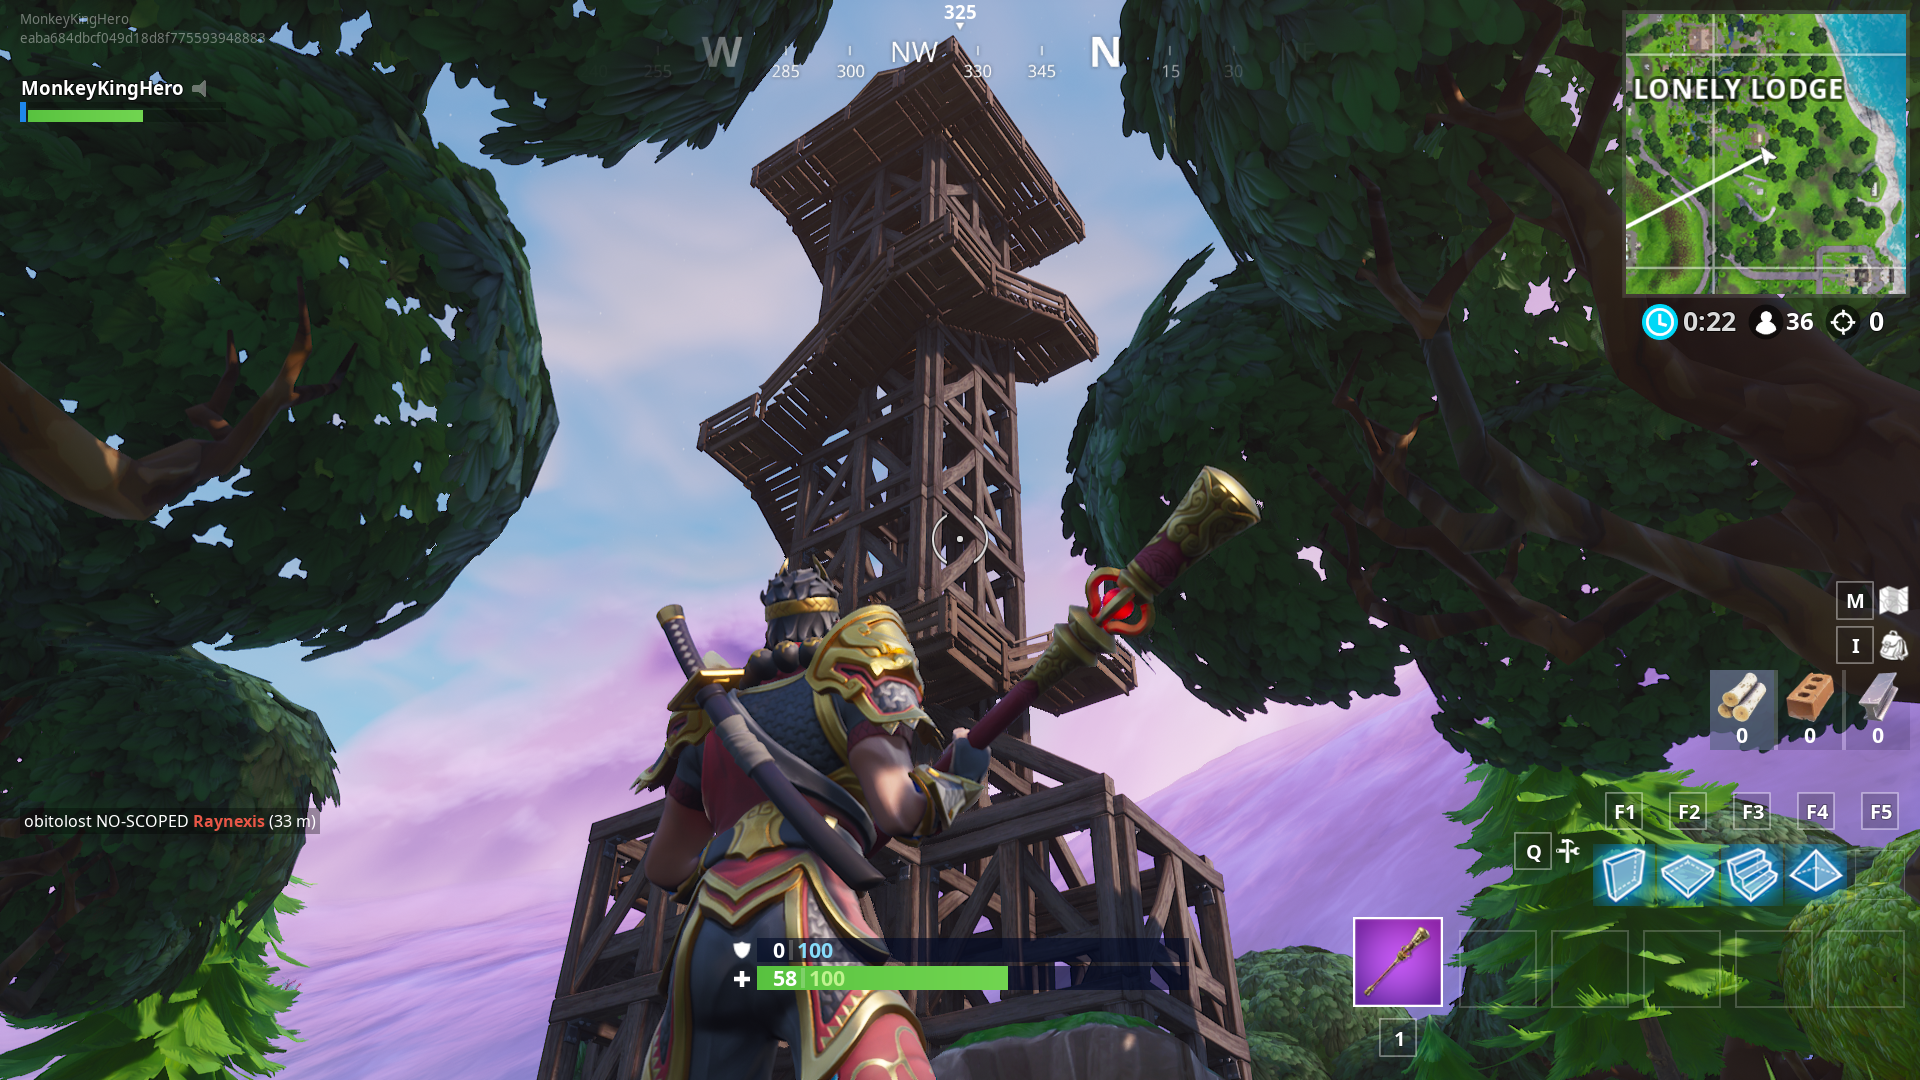 how to complete the dance on top of a water tower challenge in fortnite season 7 week 5 - f2 fortnite